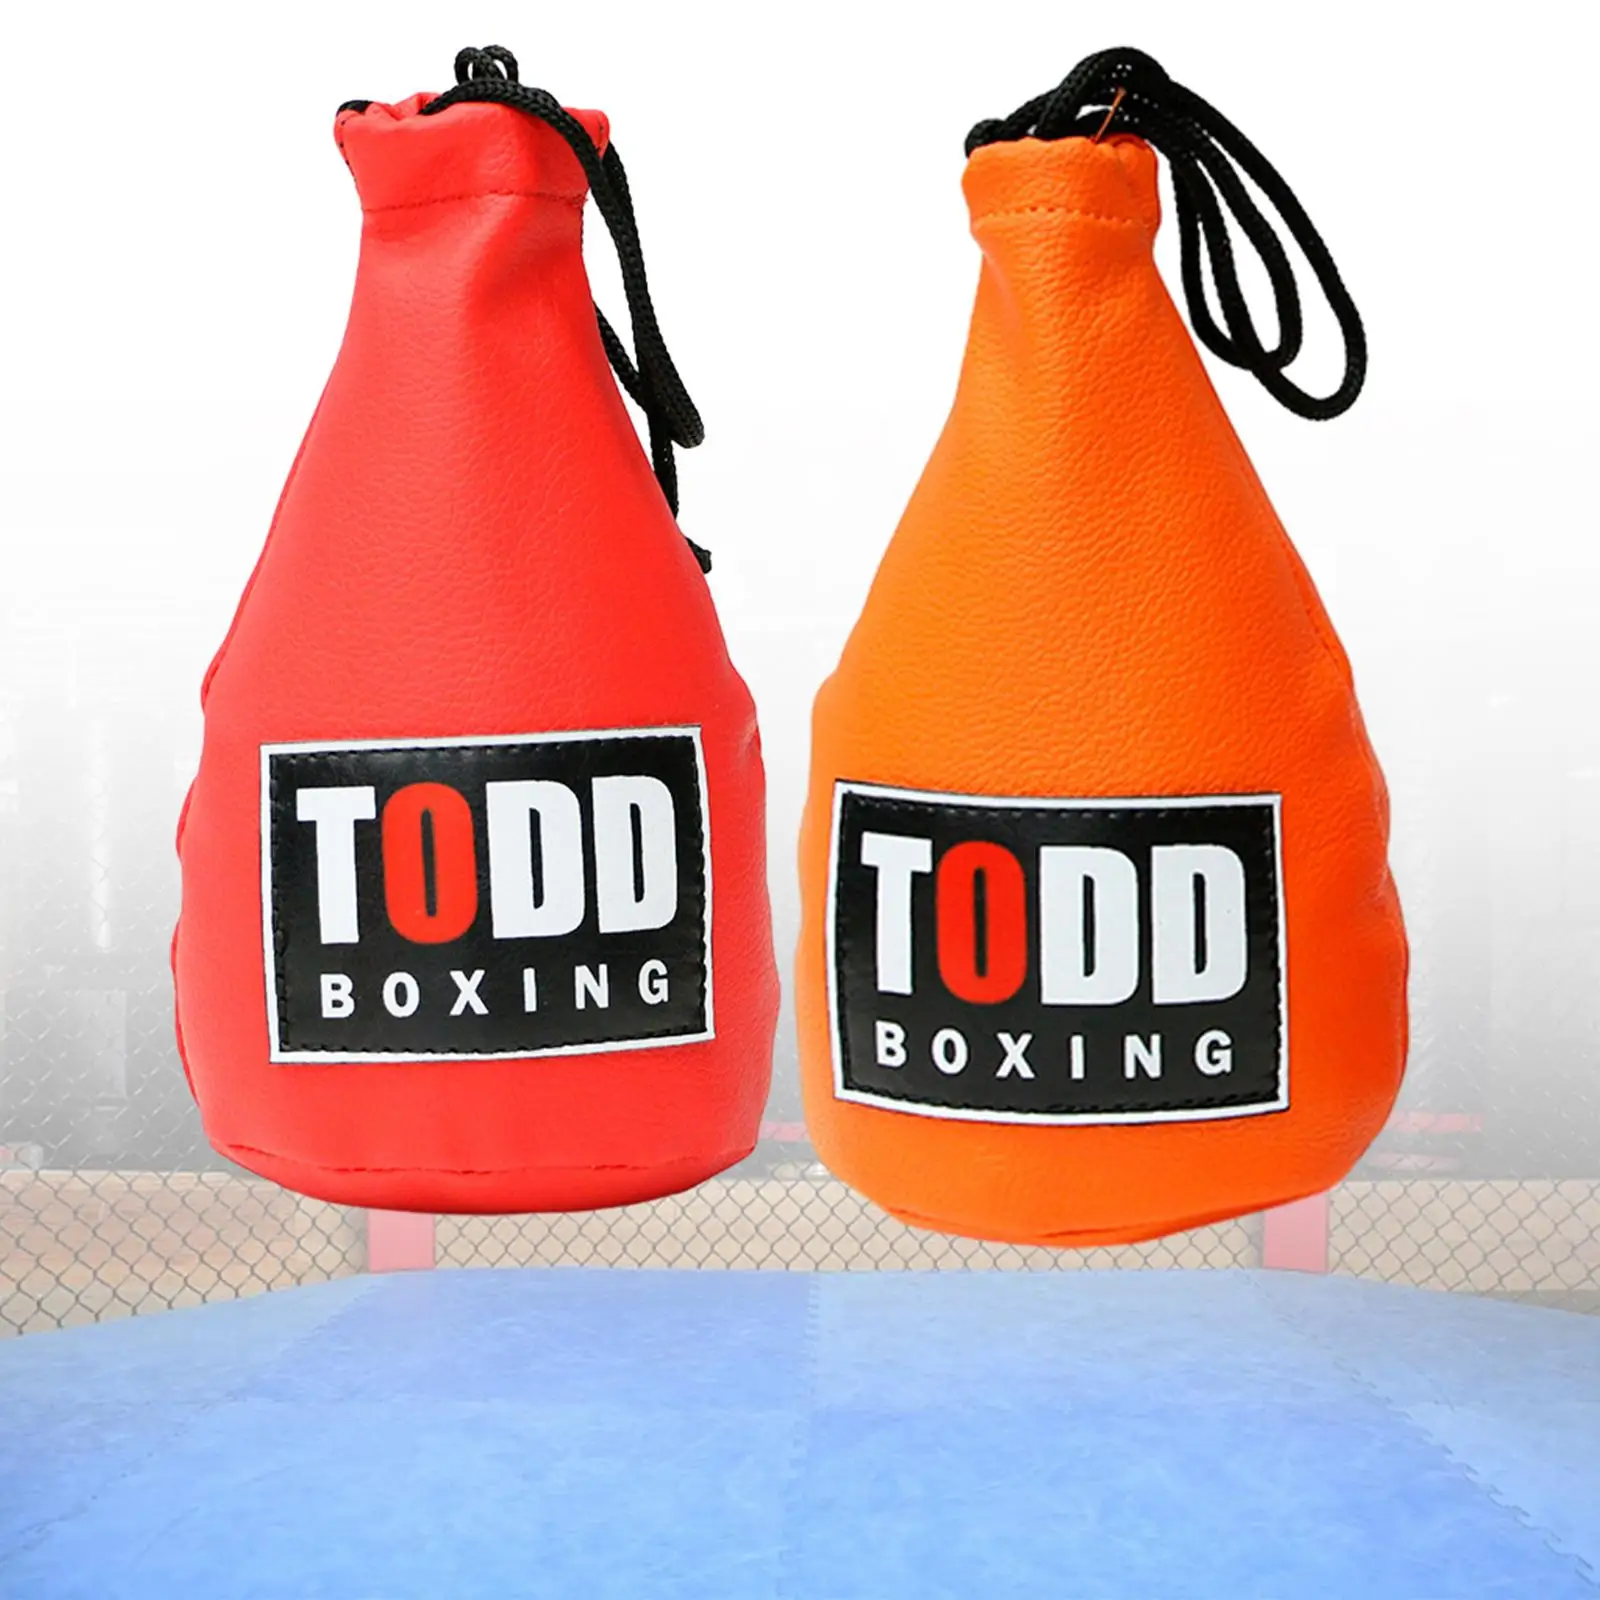 Boxing Dodge Training Bag Men Women Gear Boxing Punch Bag for Reaction Hand Eye Coordination Punching Speed Skill Home Gym